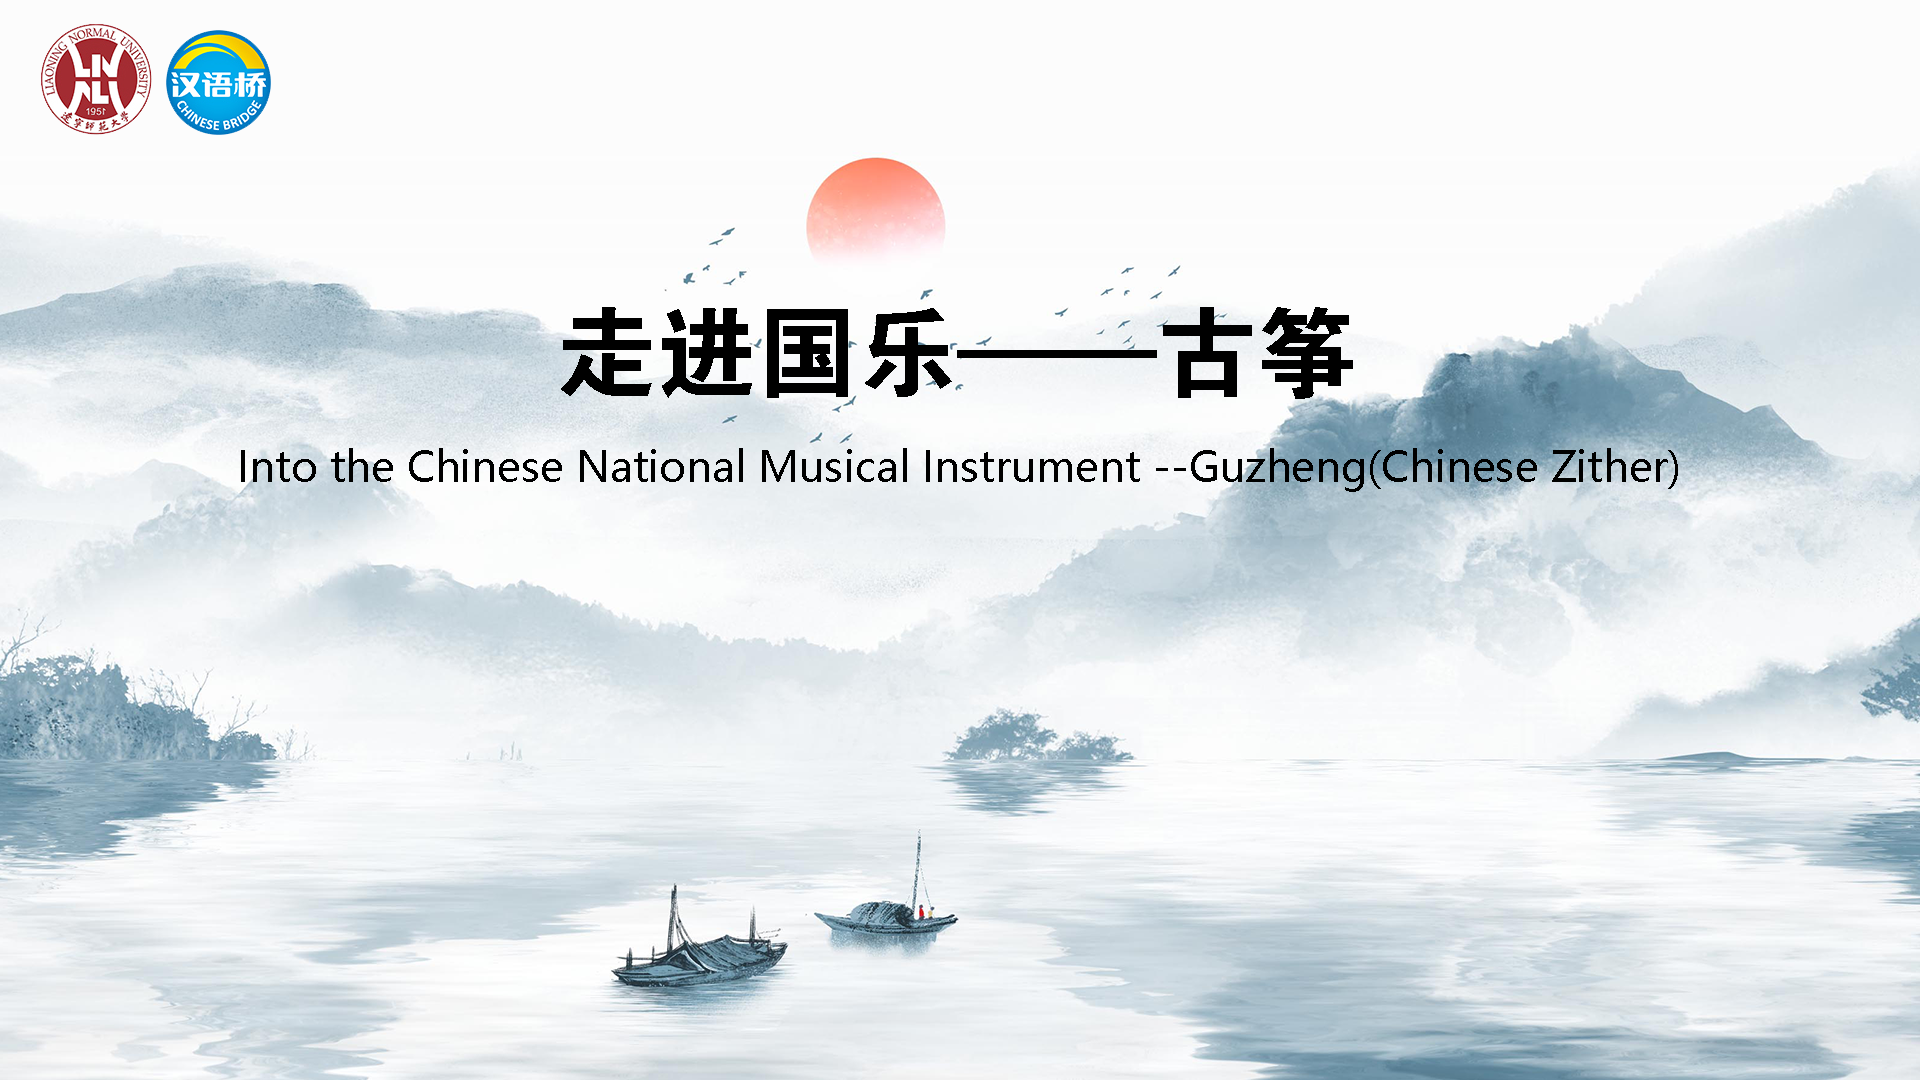 Into the Chinese National Musical Instrument --Guzheng